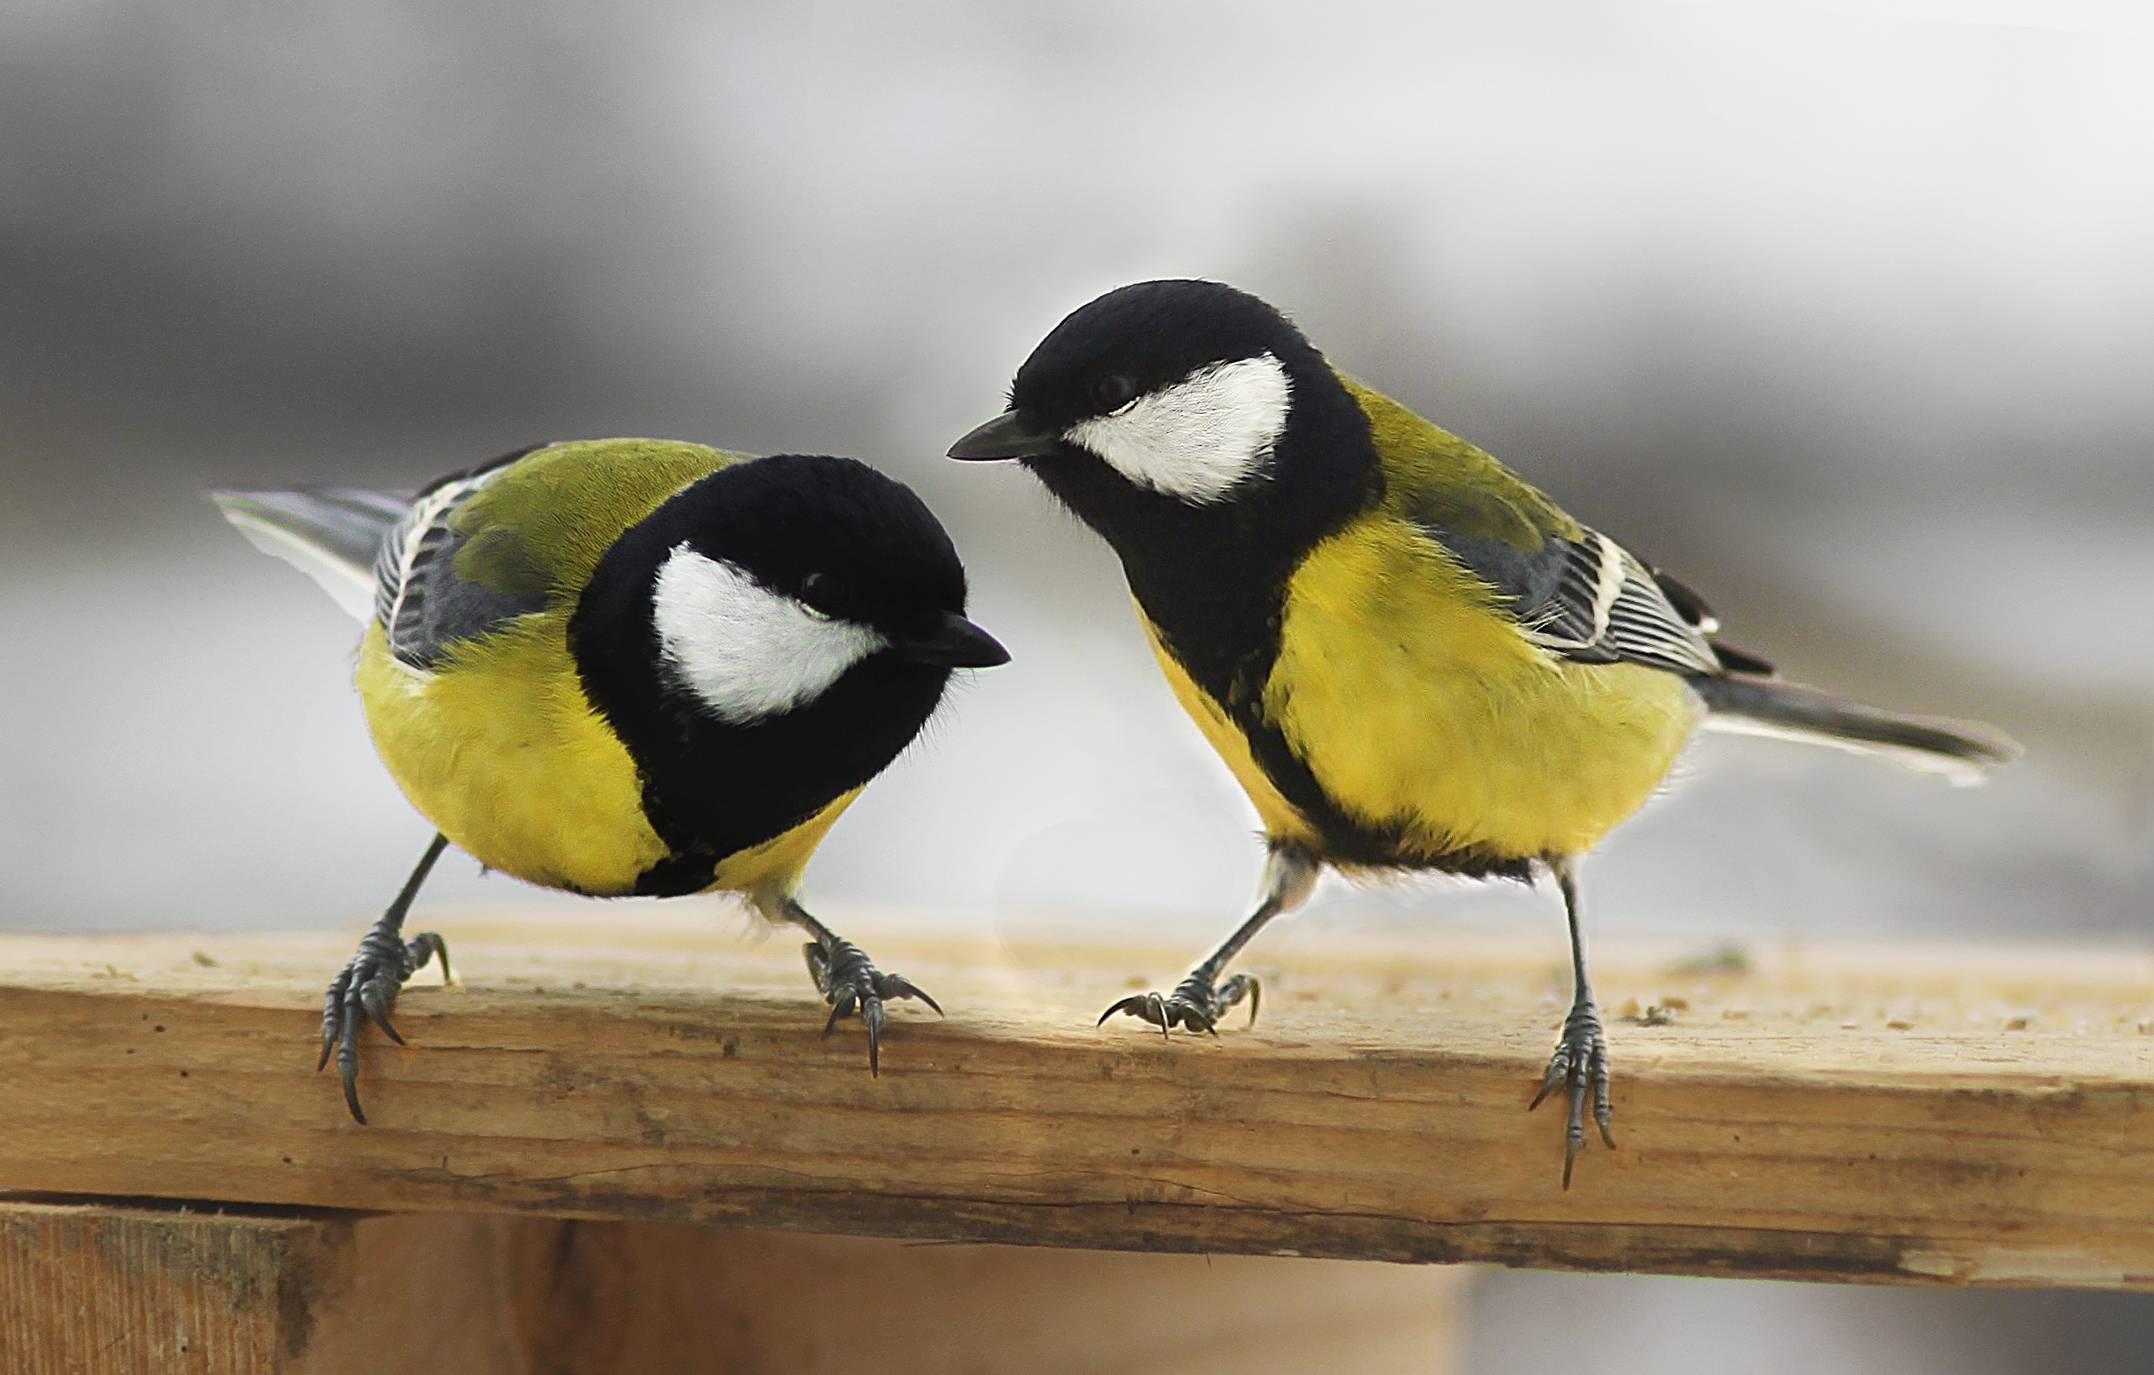 Here's a pair of GREAT TITS.